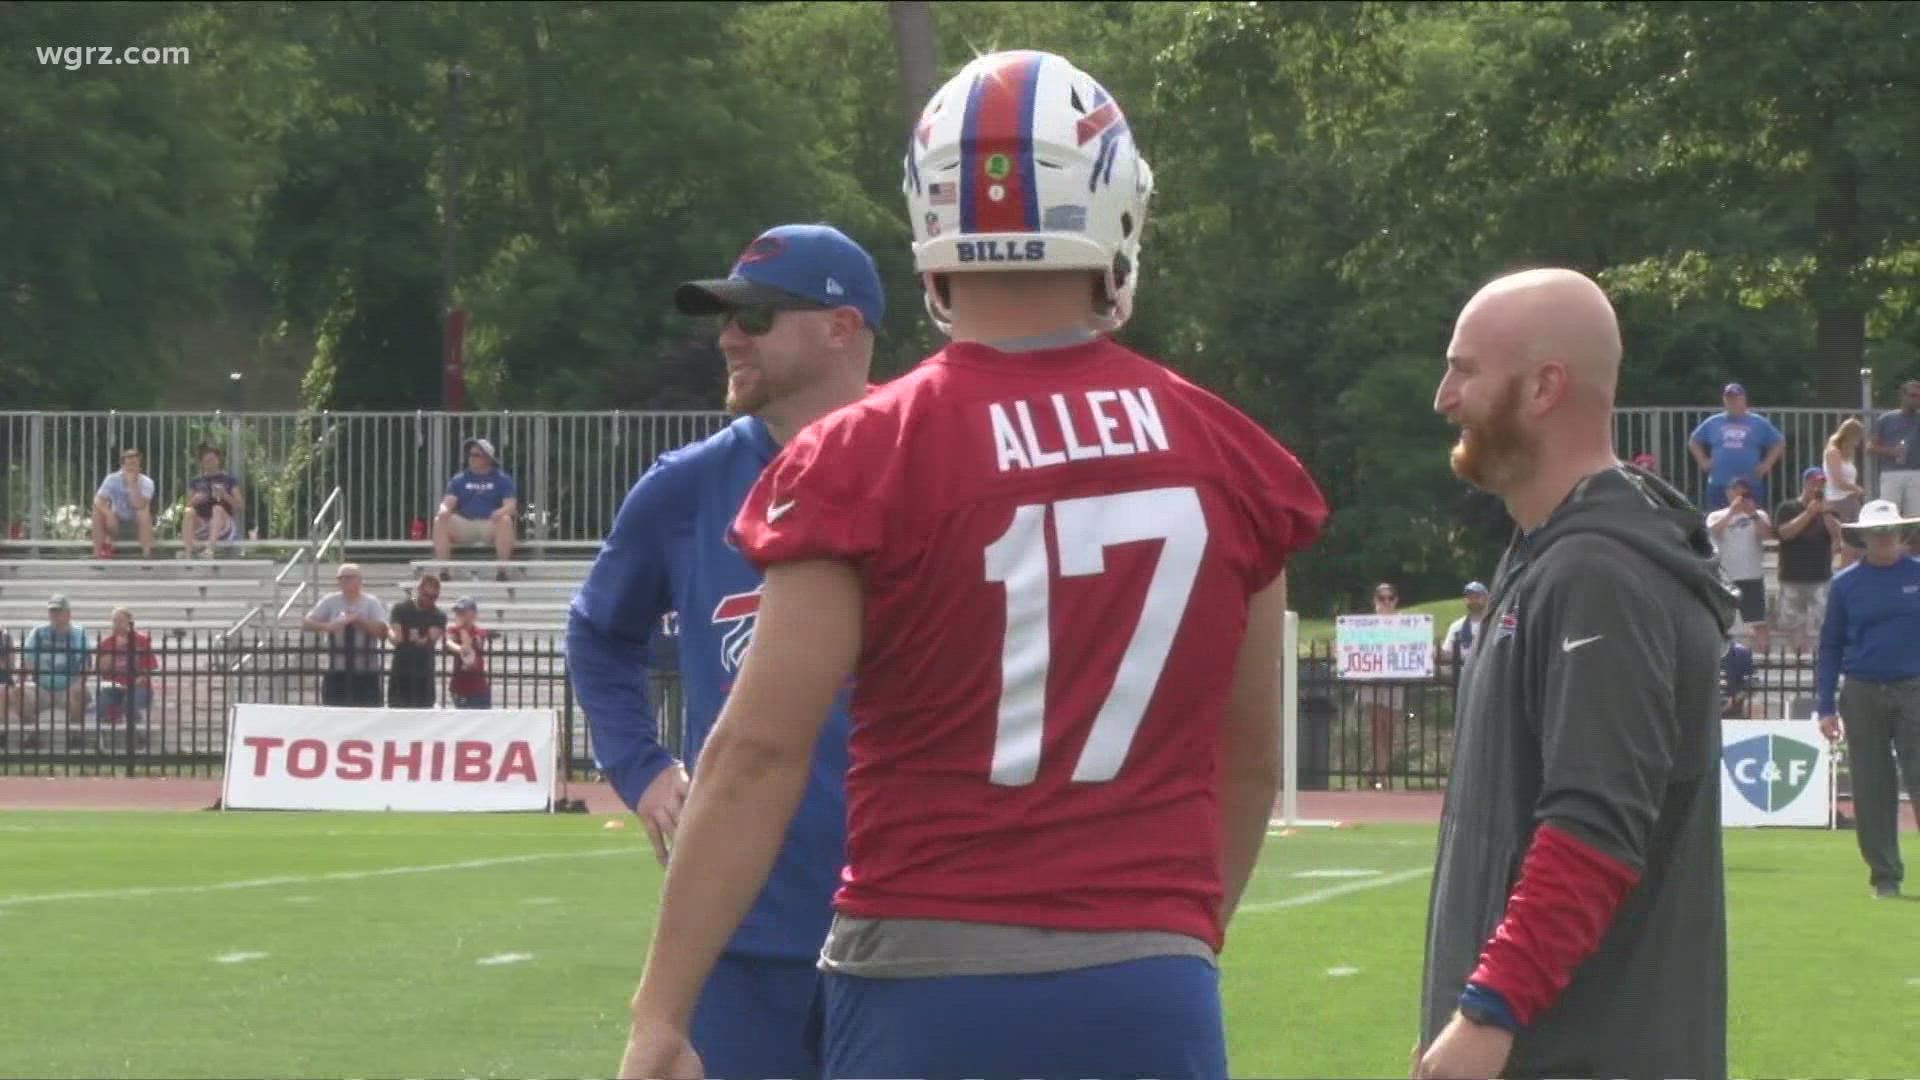 It's officially football season as the Bills kick off training camp in Rochester today!